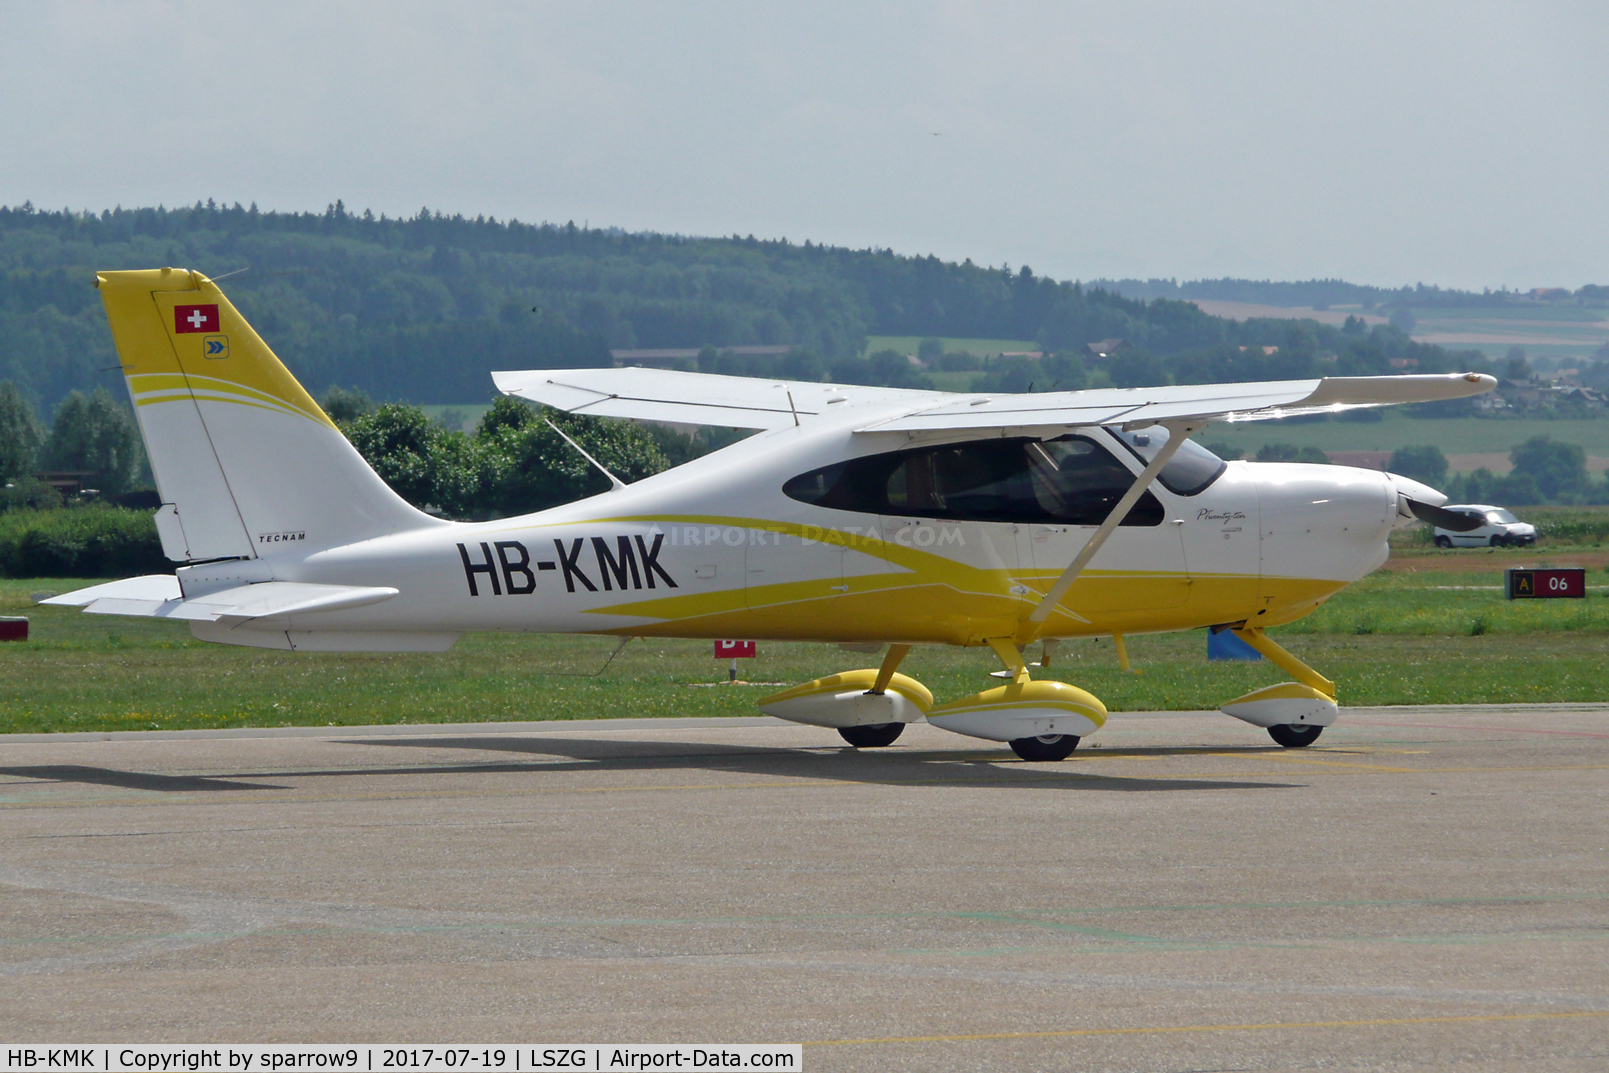 HB-KMK, 2015 Tecnam P-2010 C/N 029, It looks better with the nosewheel fairing. HB-registered from 2016-01-21 until 2020-08-26.